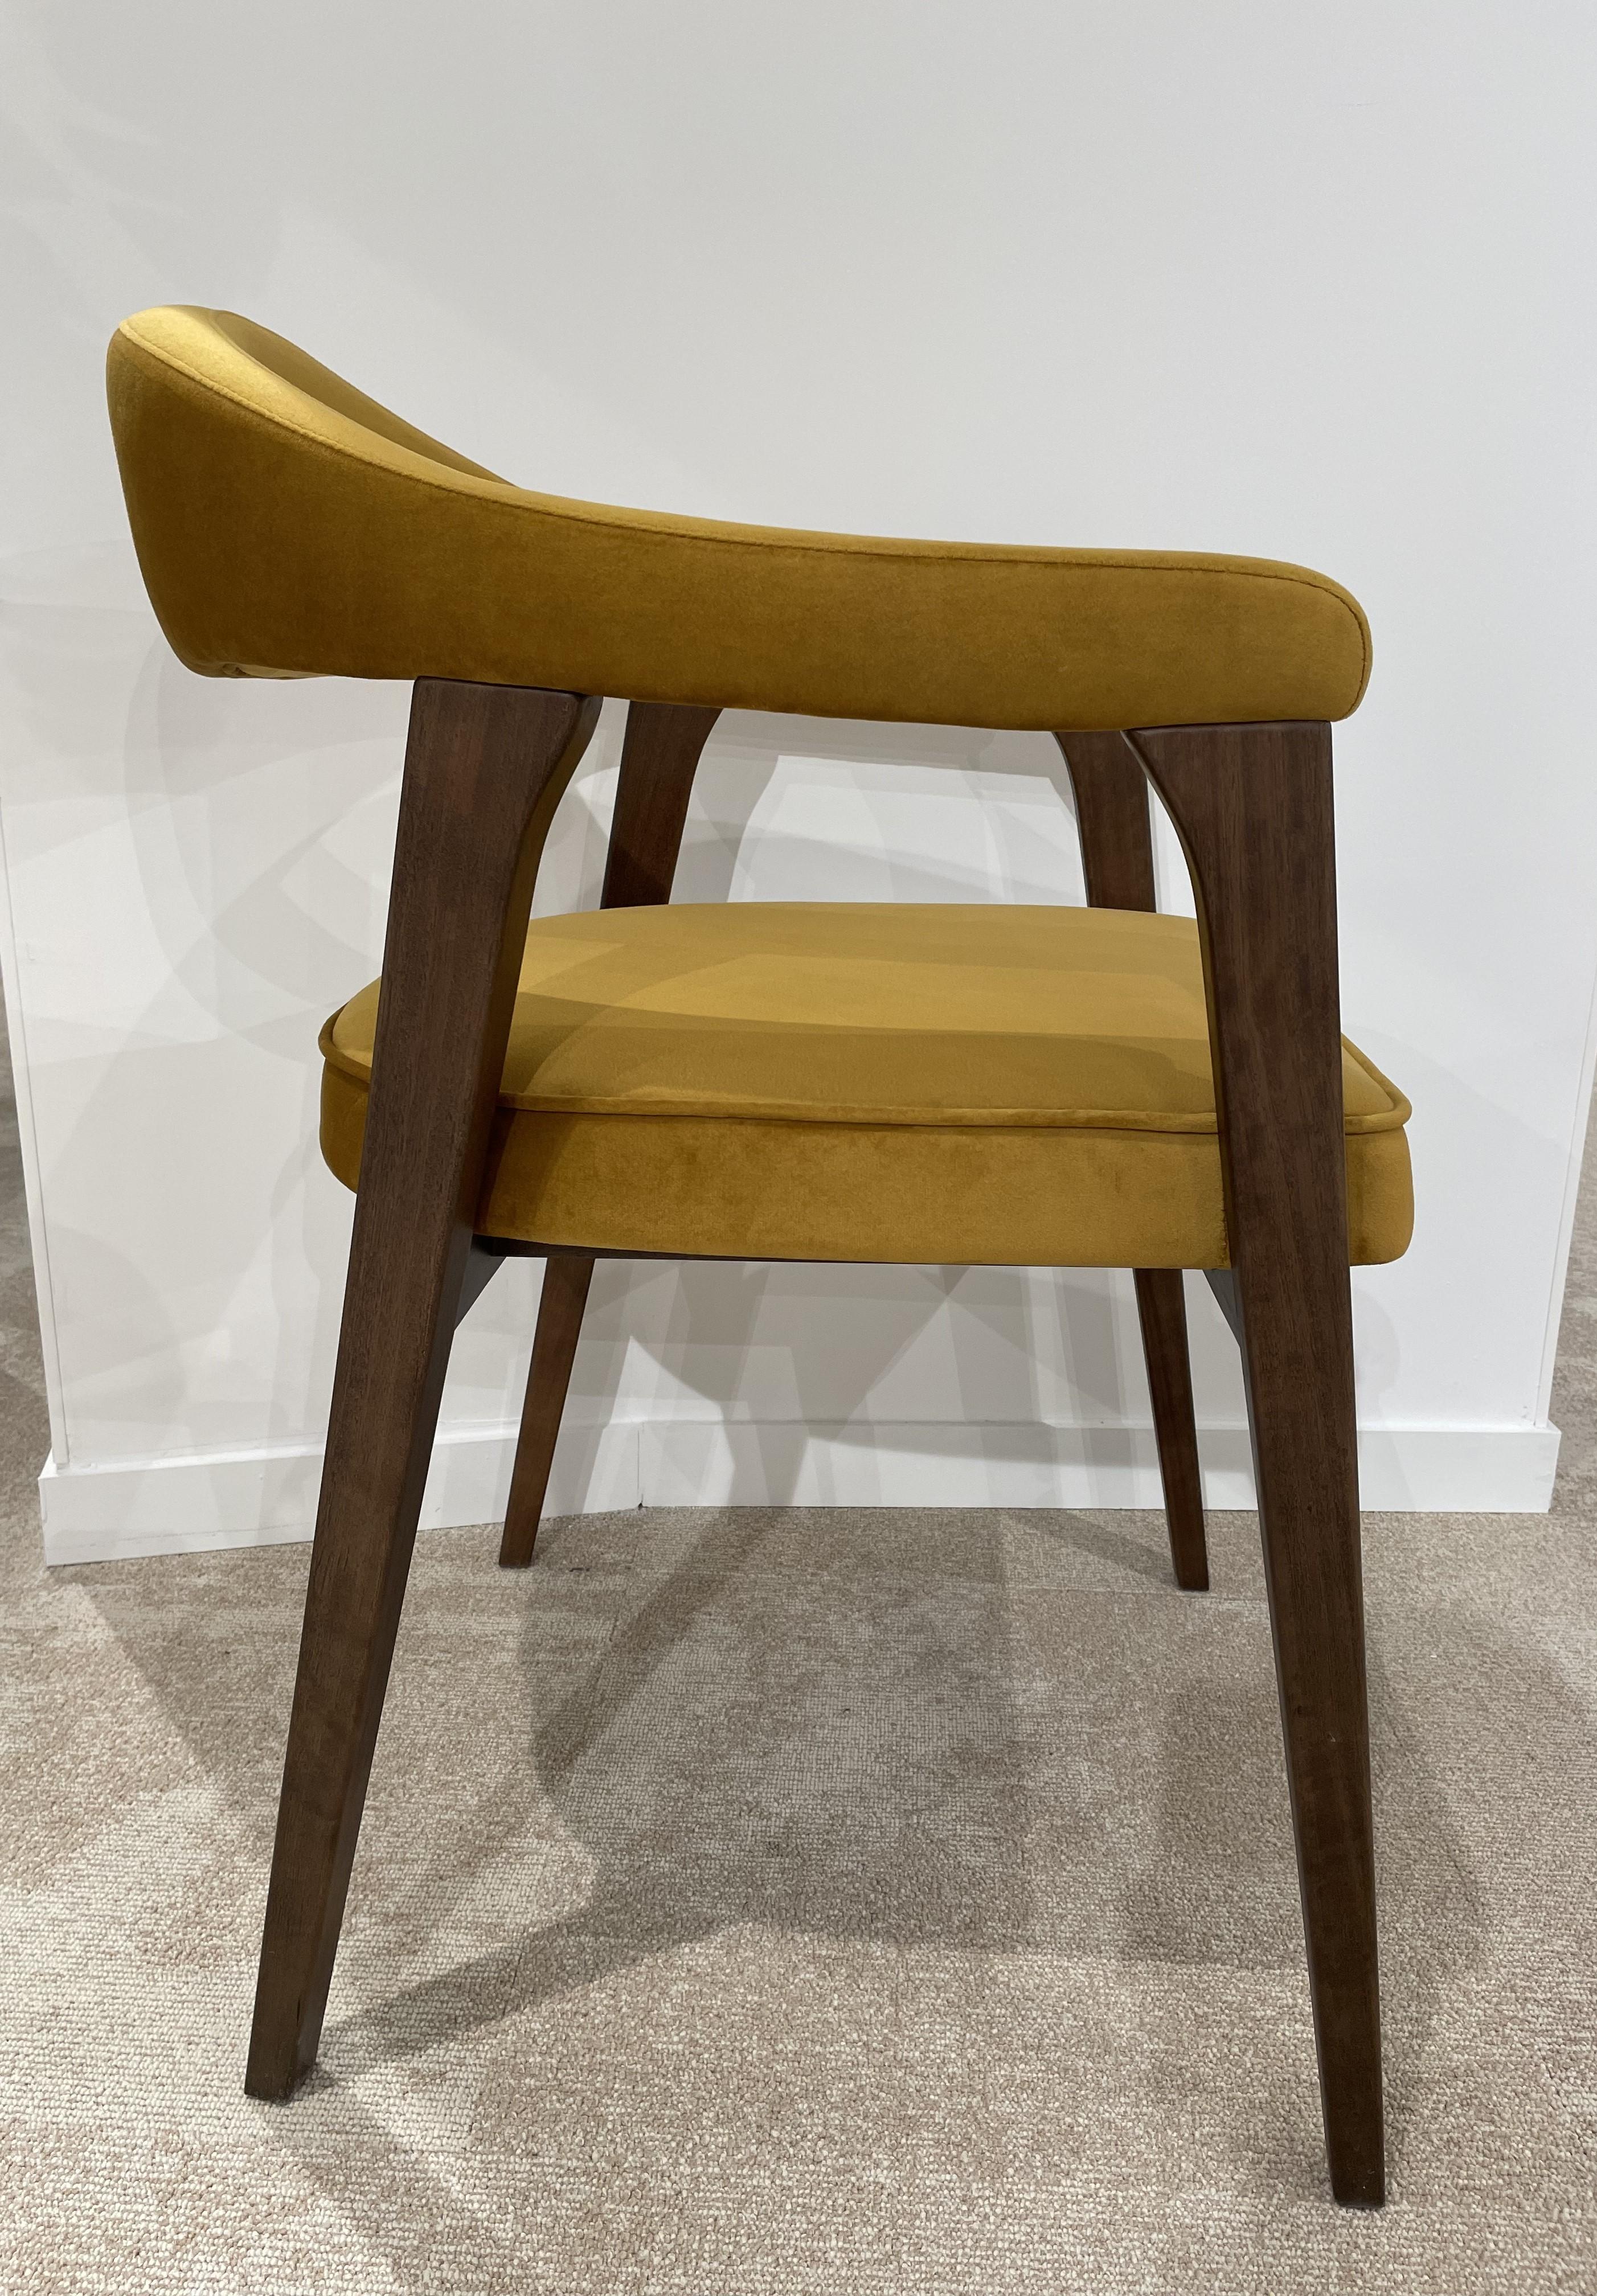 1960s Danish Design and Scandinavian Style Wooden and Velvet Fabric Chair For Sale 2